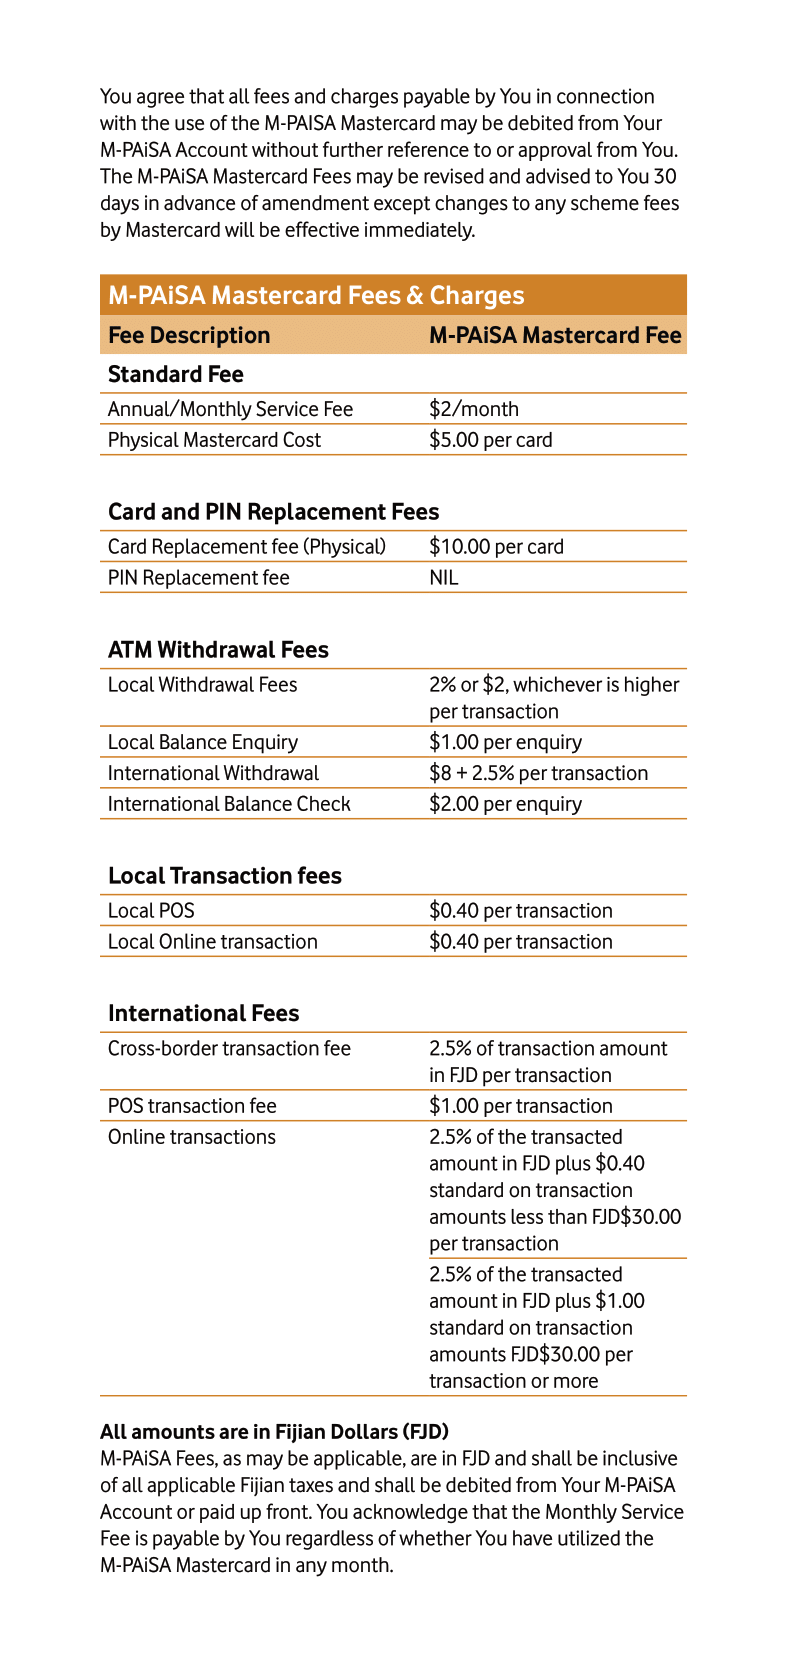 Mastercard fees & Charges v2-2